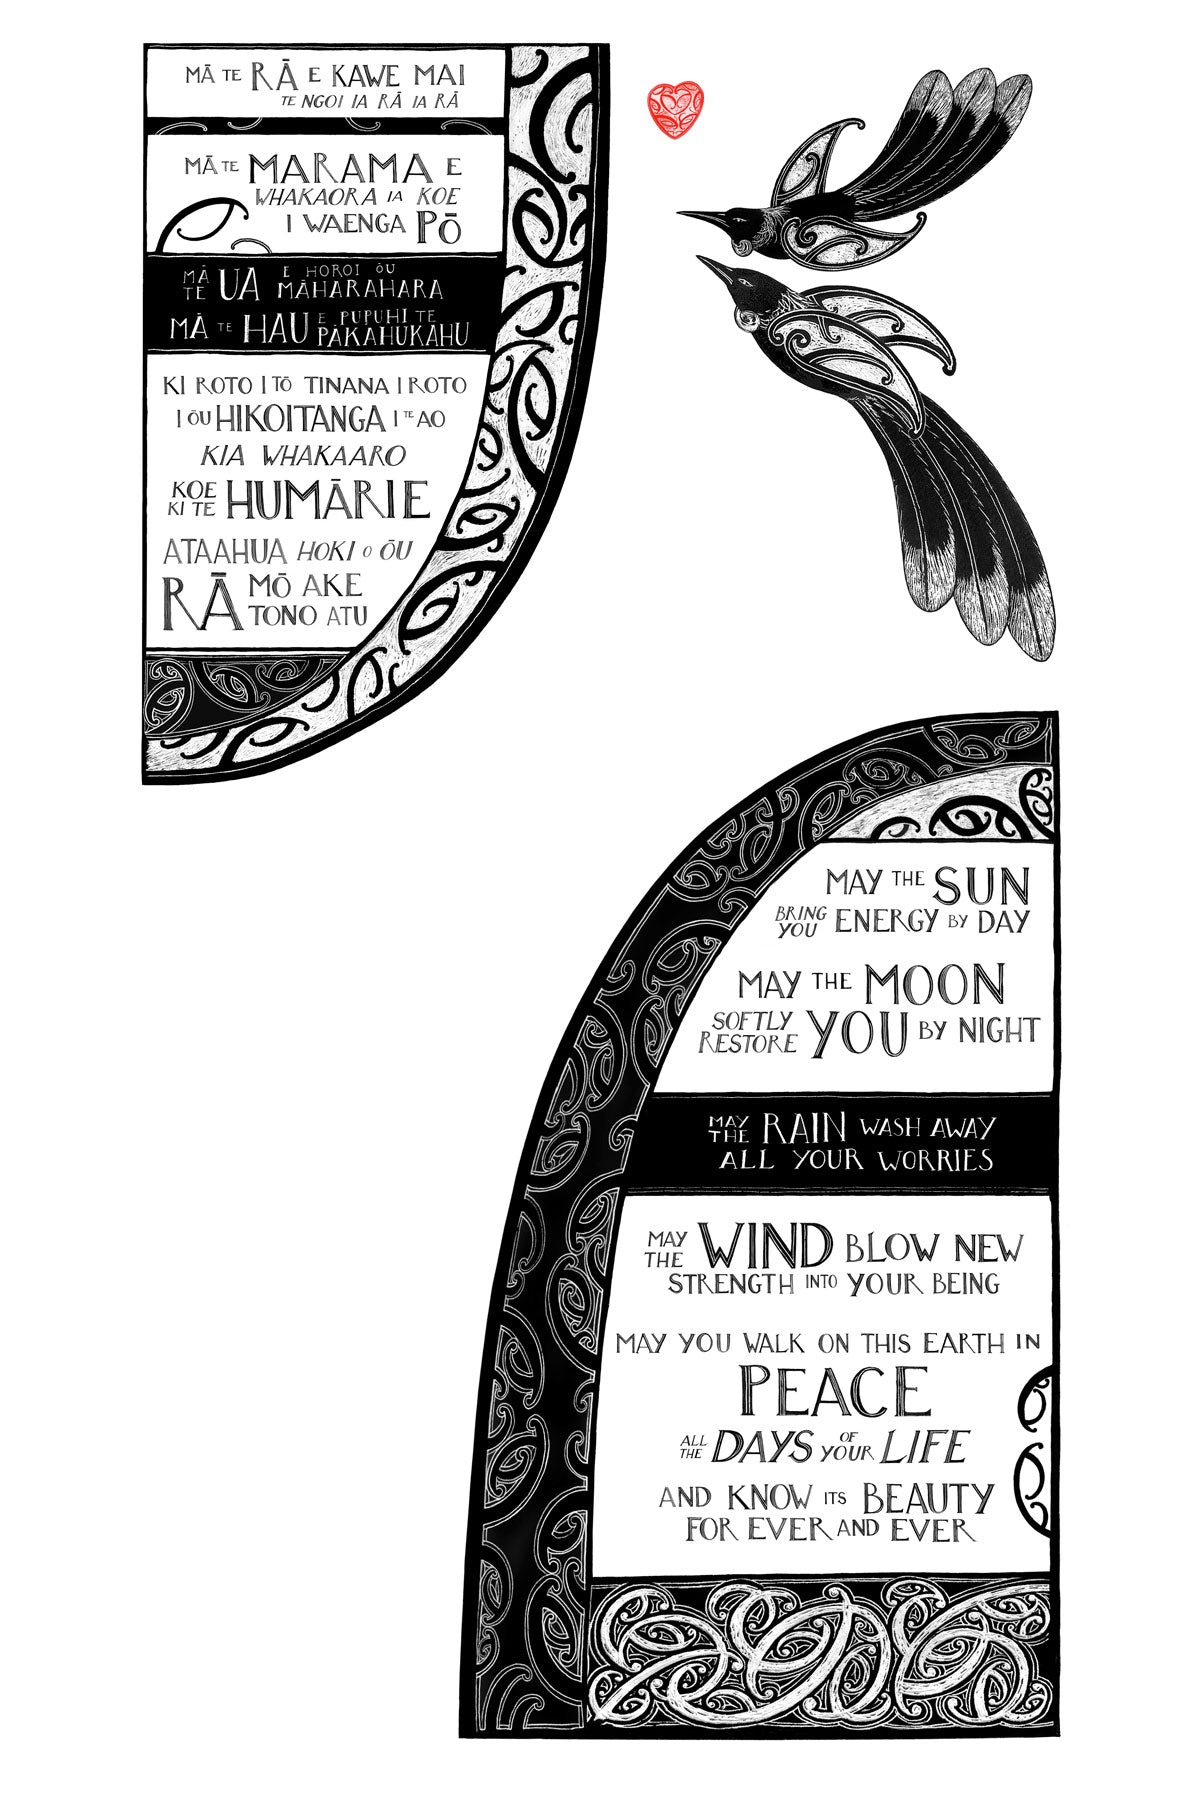 A favourite nz art print with maori art tui and blessing may the sun bring you energy by day by nz artist amber smith